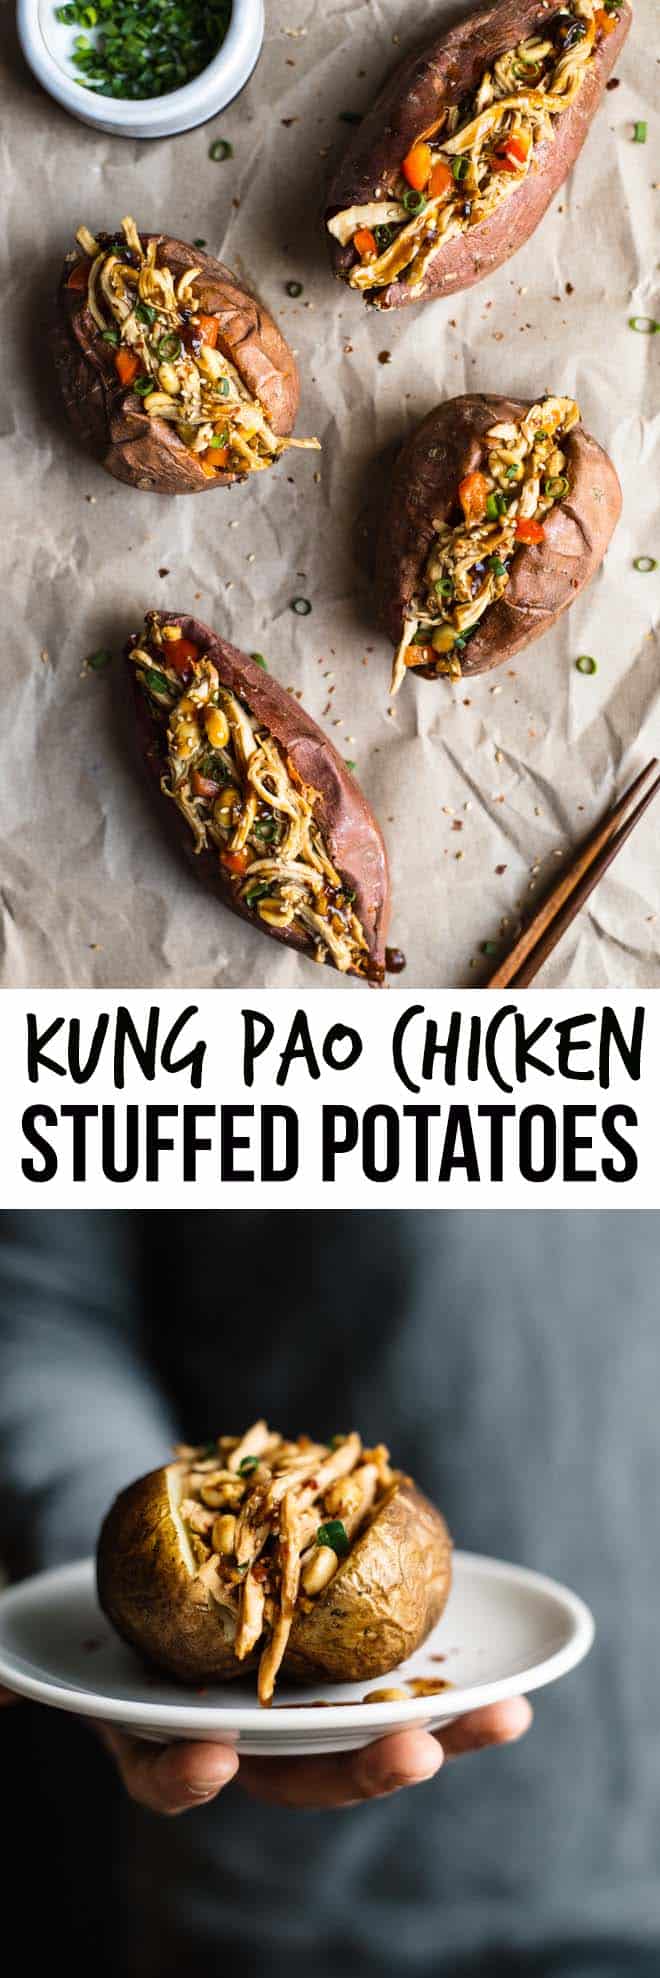 Kung Pao Chicken Stuffed Potatoes, Two Ways - a delicious, gluten-free dish that is ready in 45 minutes! by Lisa Lin of webserie.futebolmilionario.com